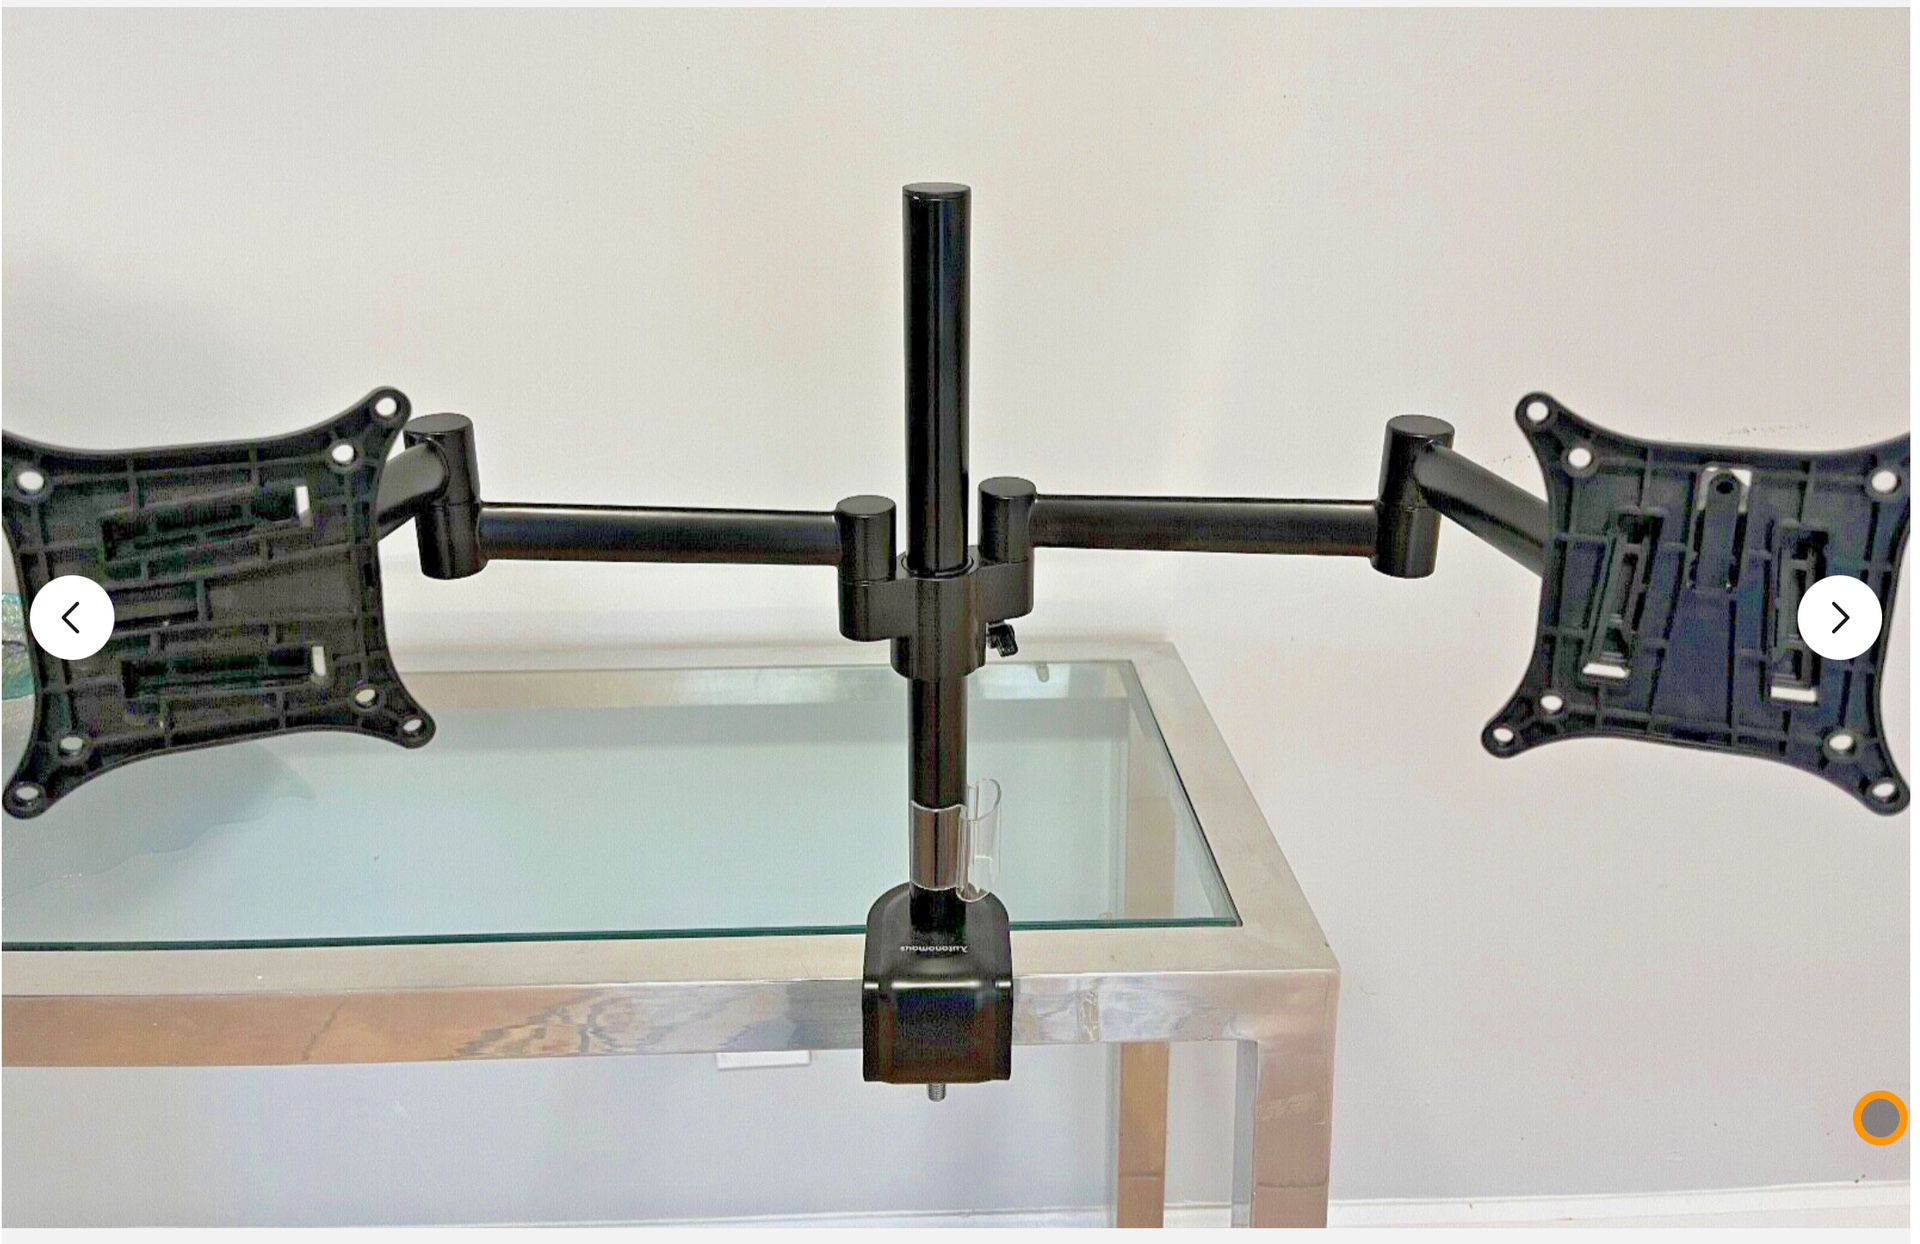 Enhance your work productivity with the Autonomous A139 Dual Monitor VESA Standard Mounting Arm. This desk mount is perfect for those who use two moni